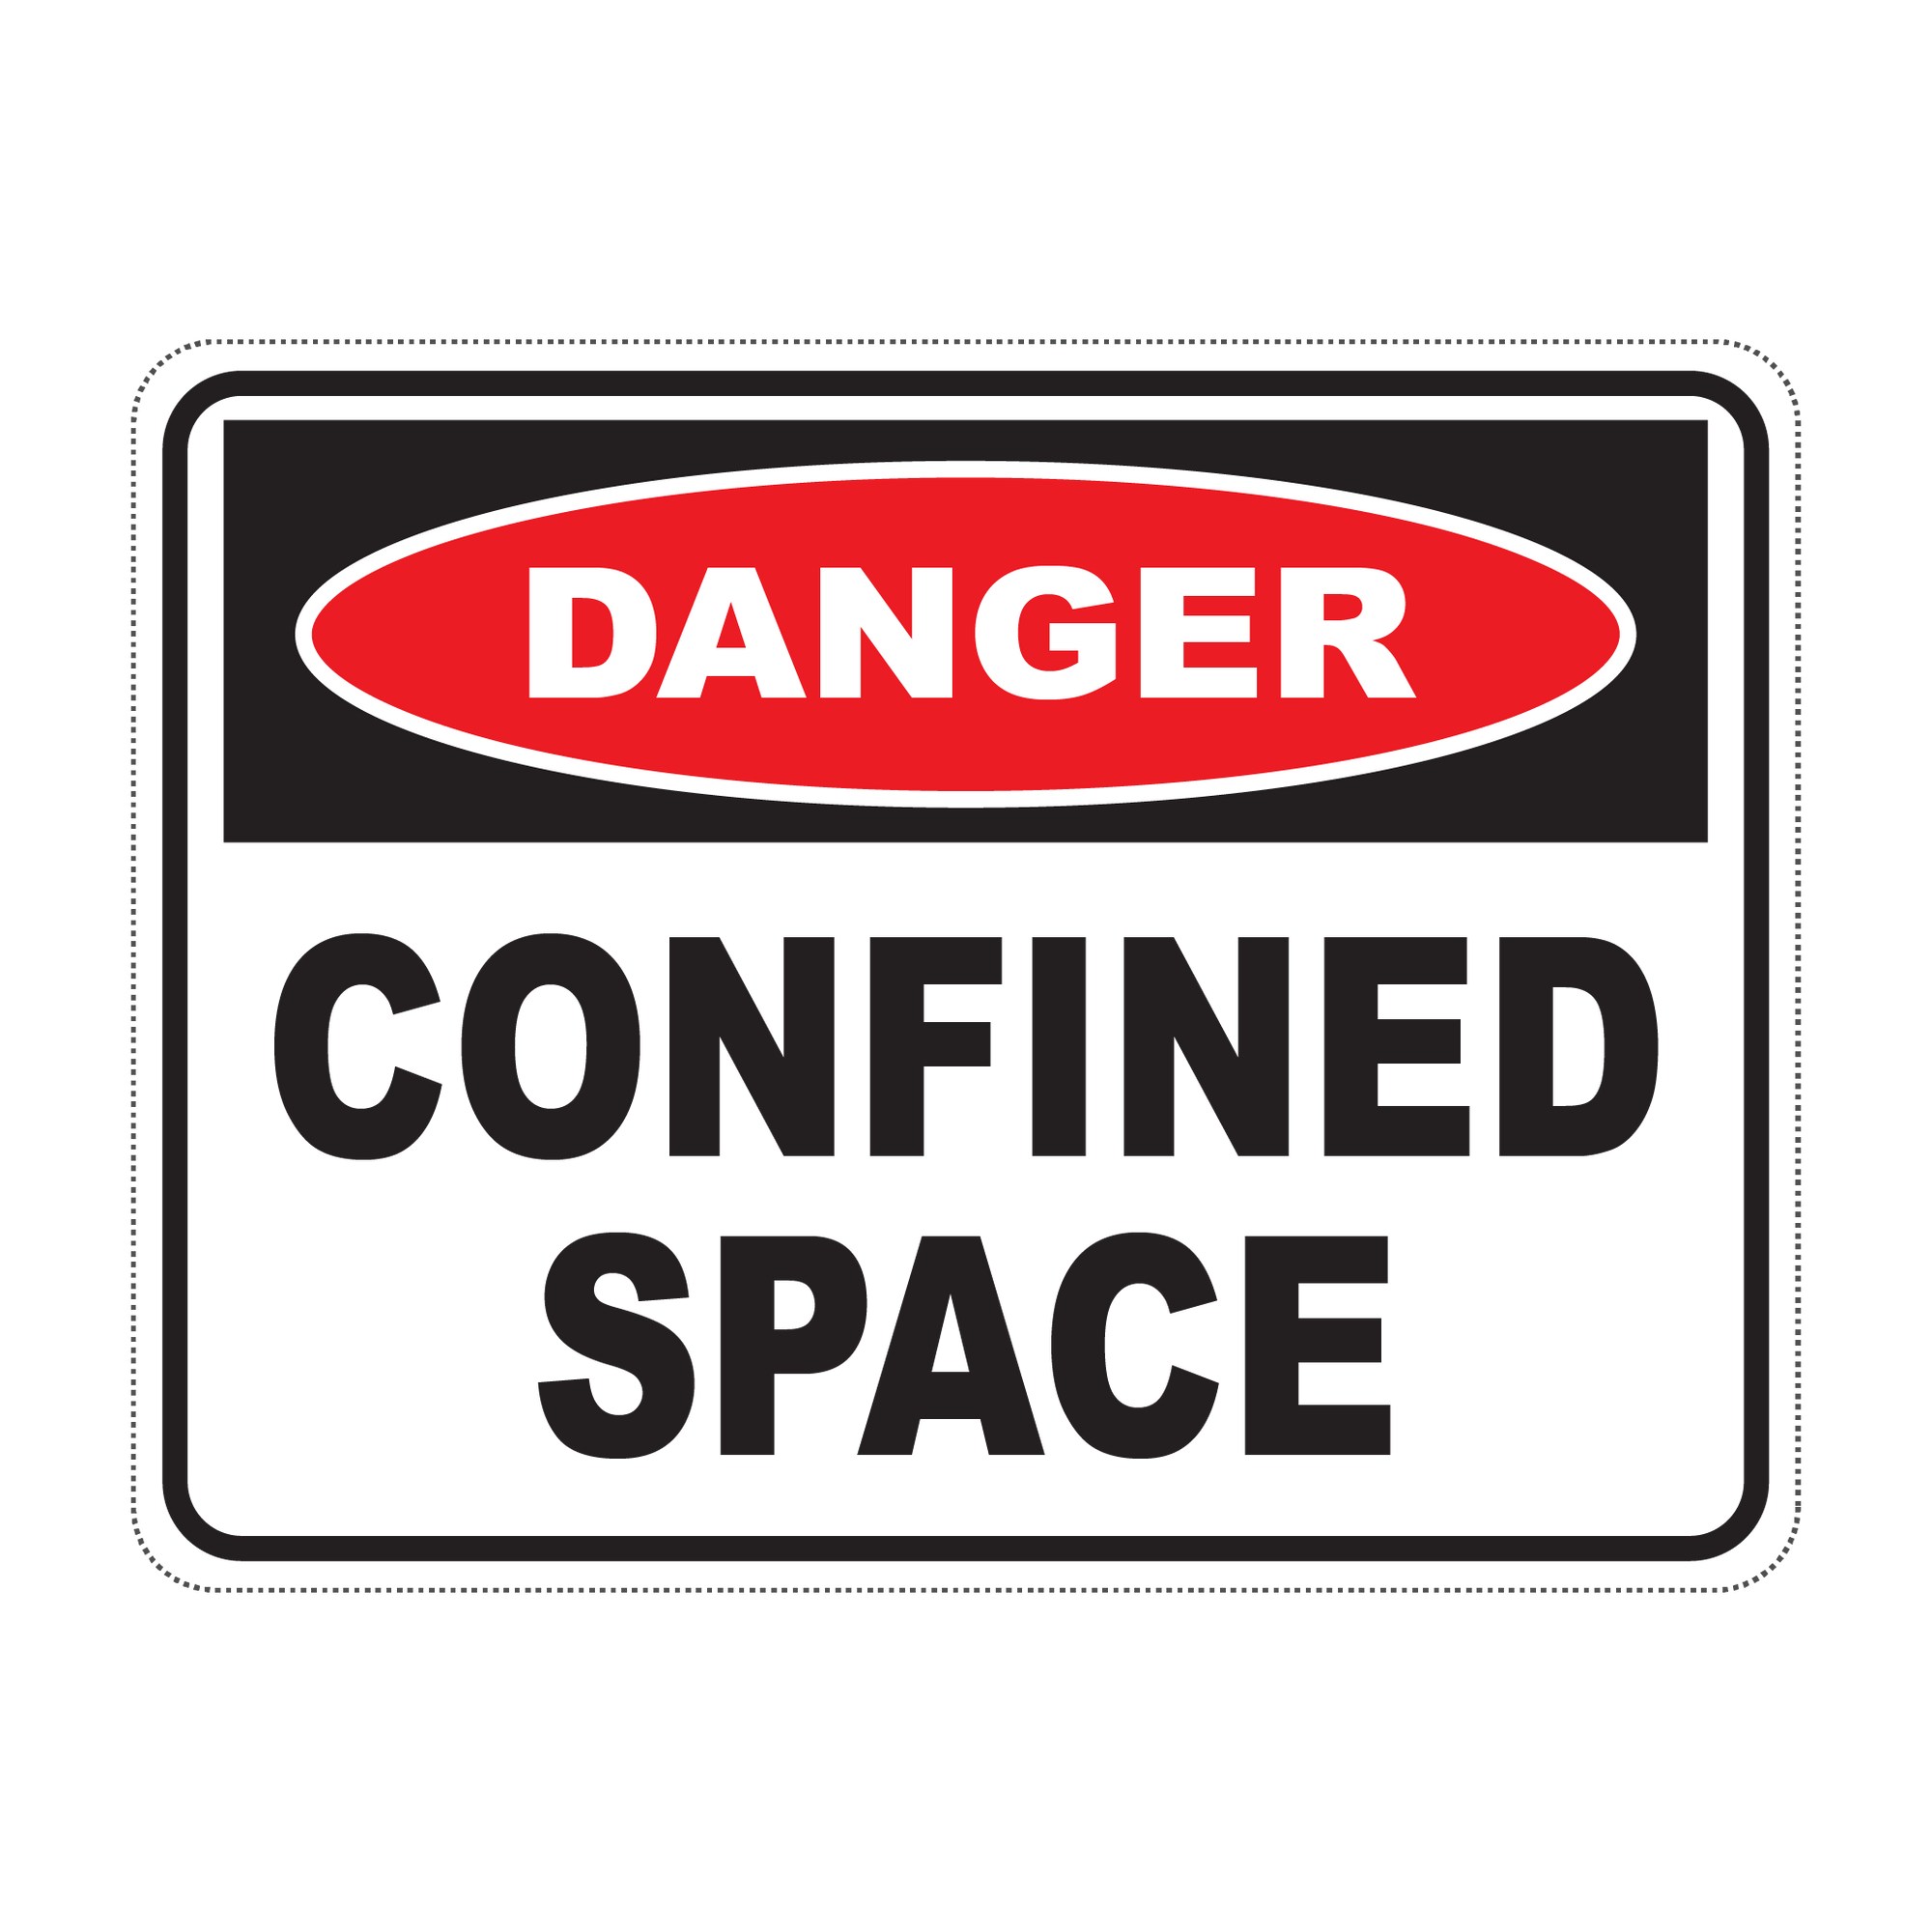 DANGER CONFINED SPACE - S38